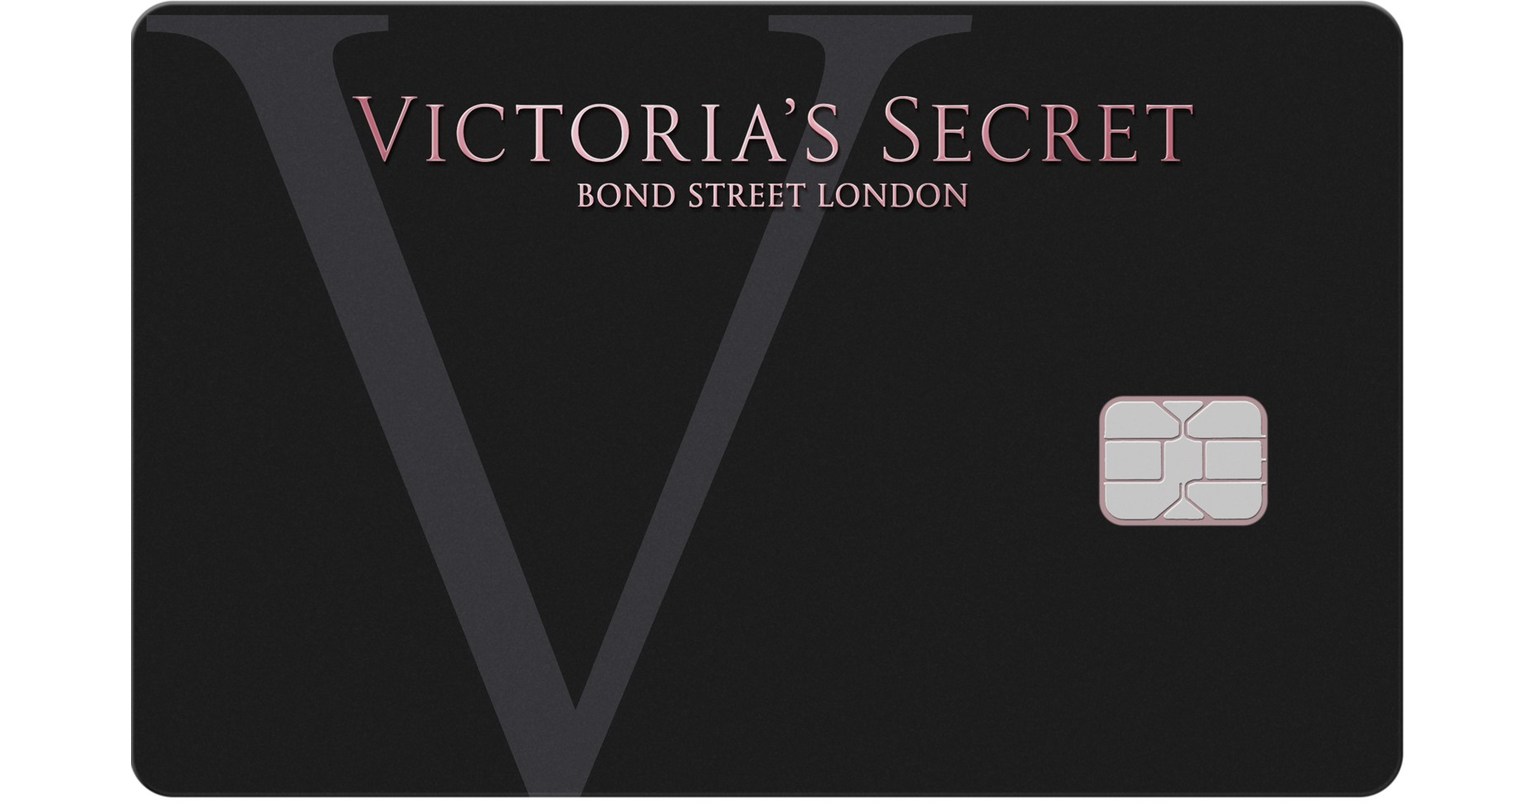 Victoria's Secret - Calling all Cardmembers! TODAY ONLY: Enjoy